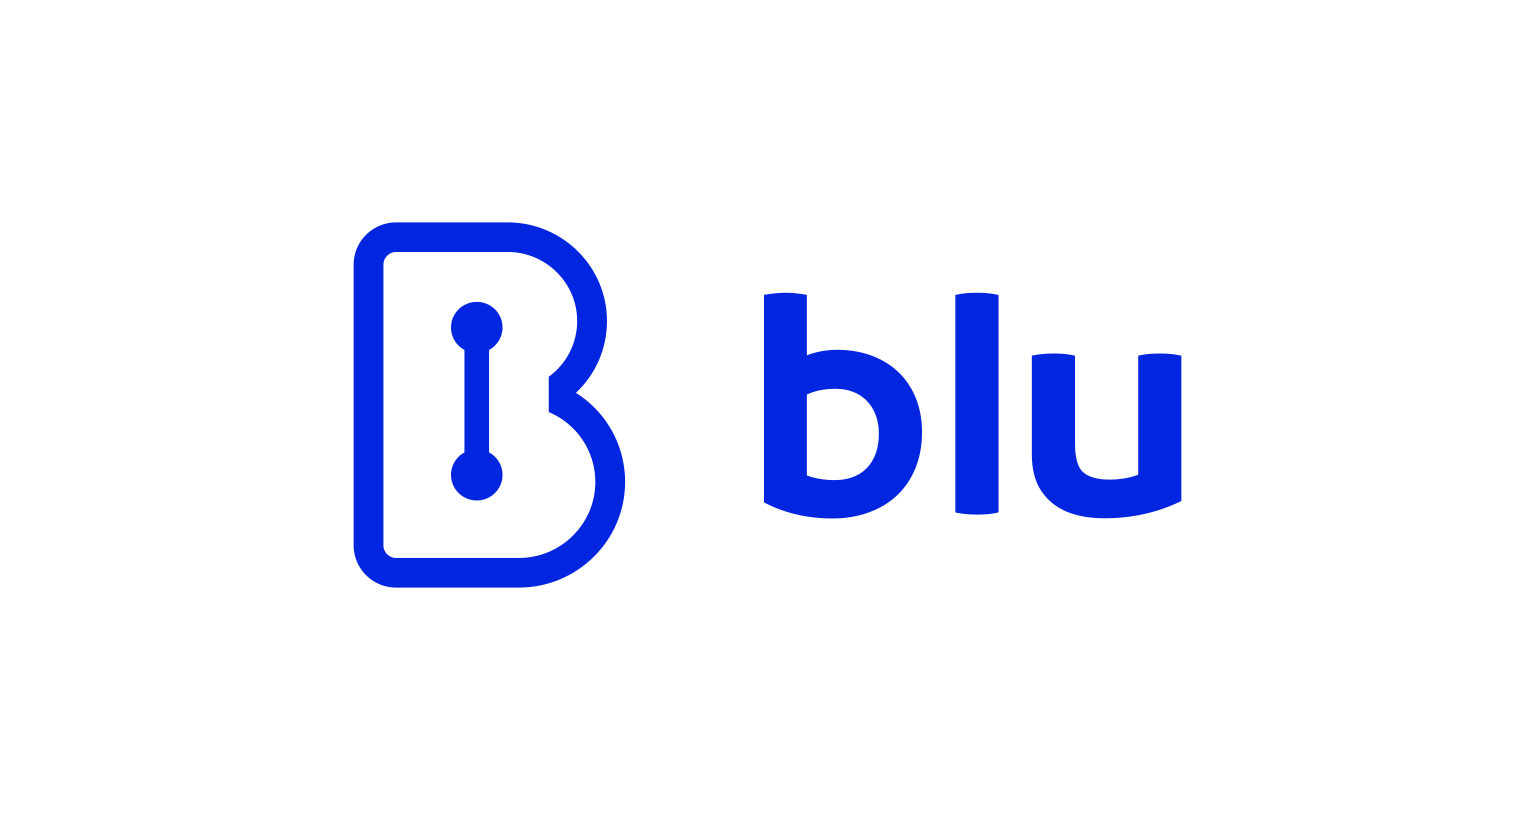 Blu accelerates their customers’ integrations with support from Jitterbit